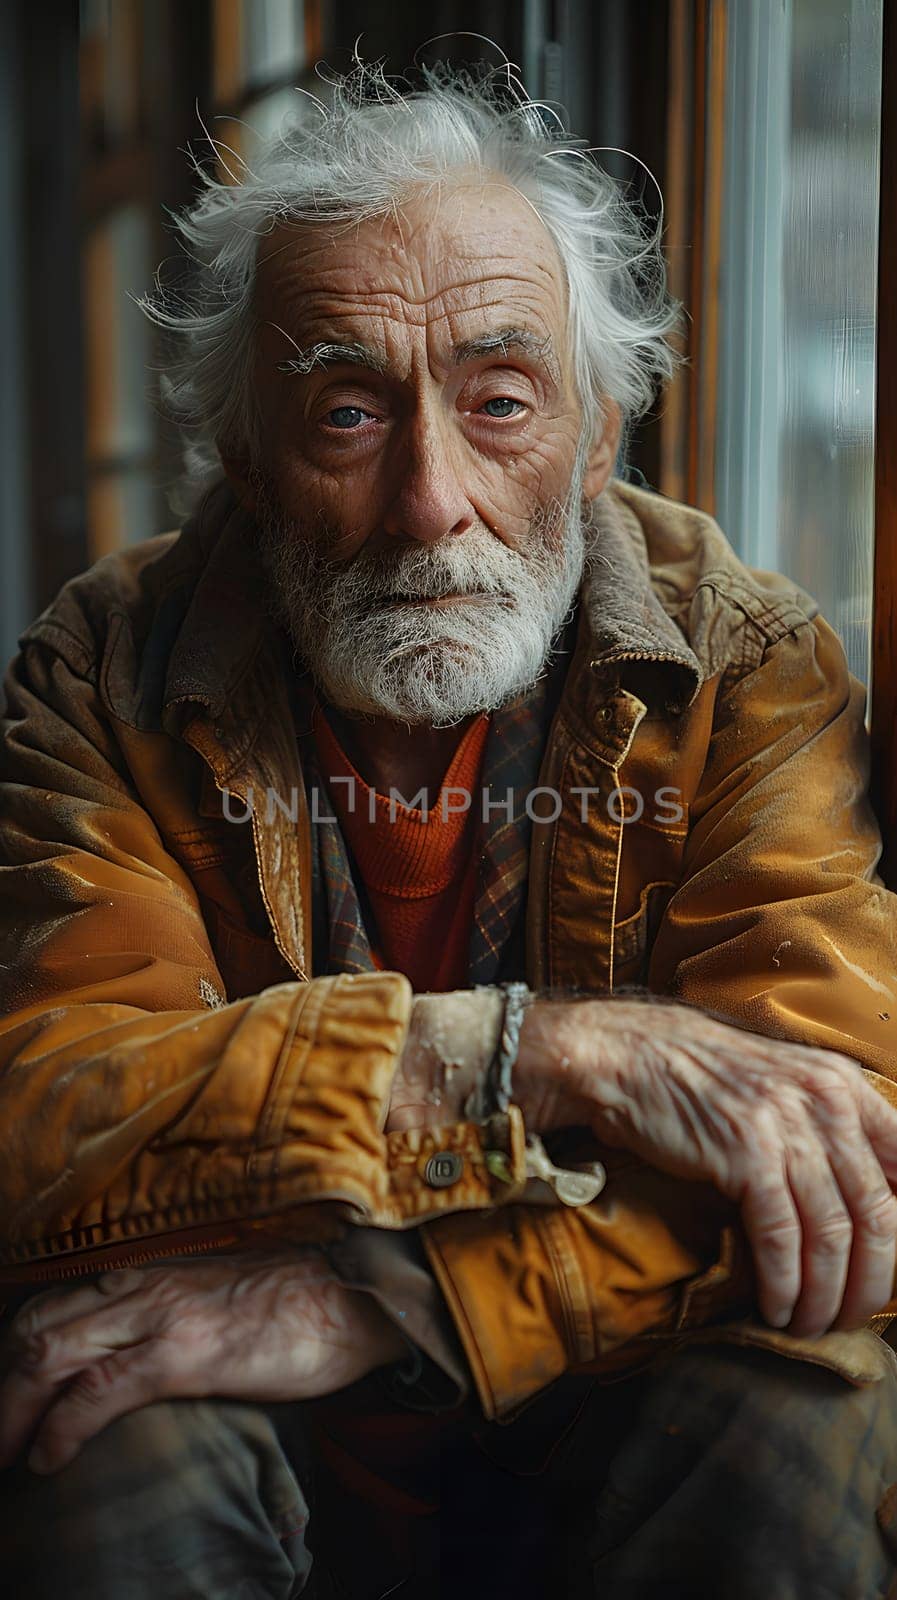 A portrait of an elderly physicist with a beard and wrinkles, sitting in front of a window. The event captures the art of aging and facial hair in visual arts